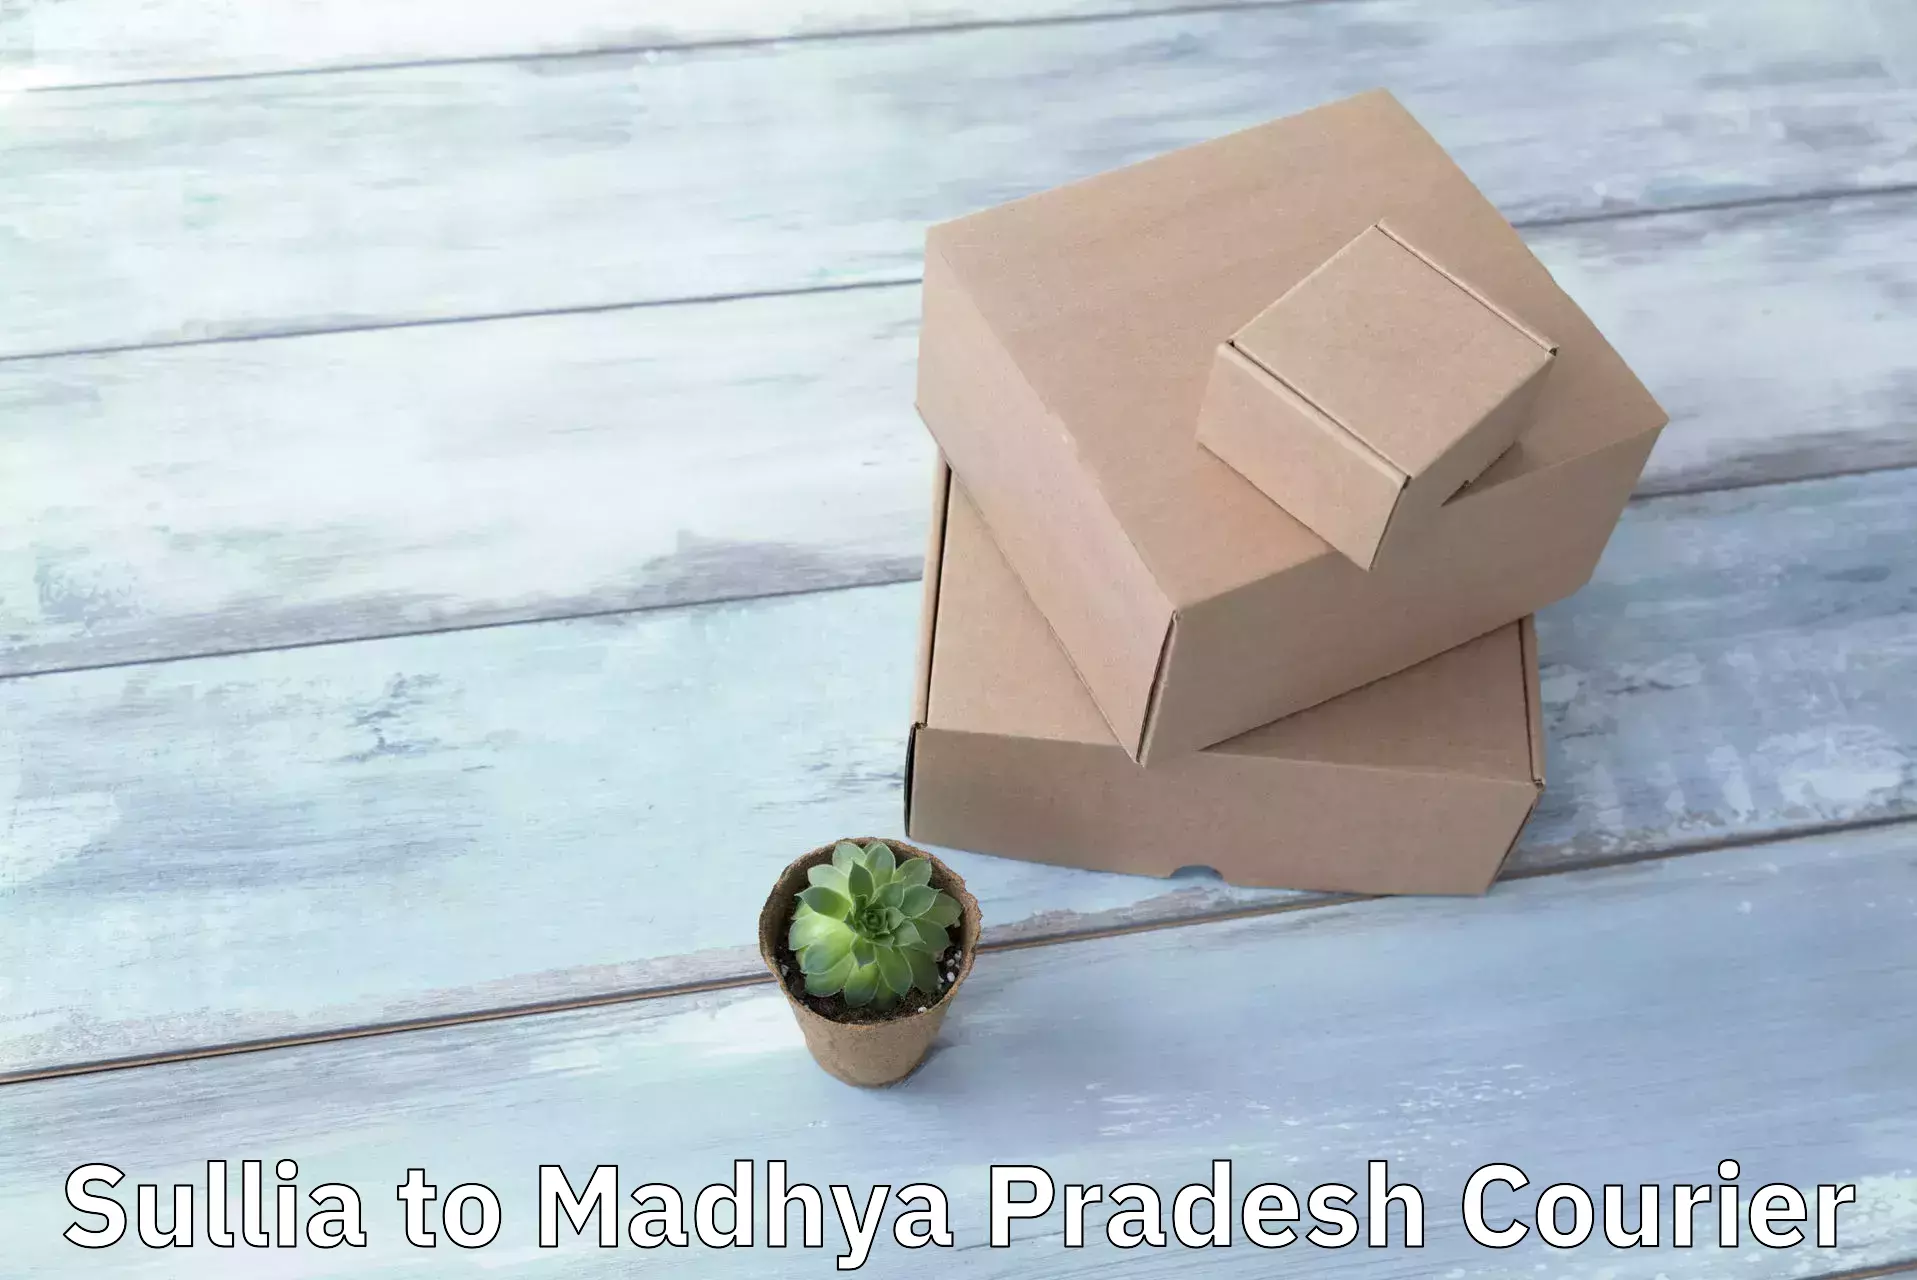 Corporate courier solutions Sullia to Indore